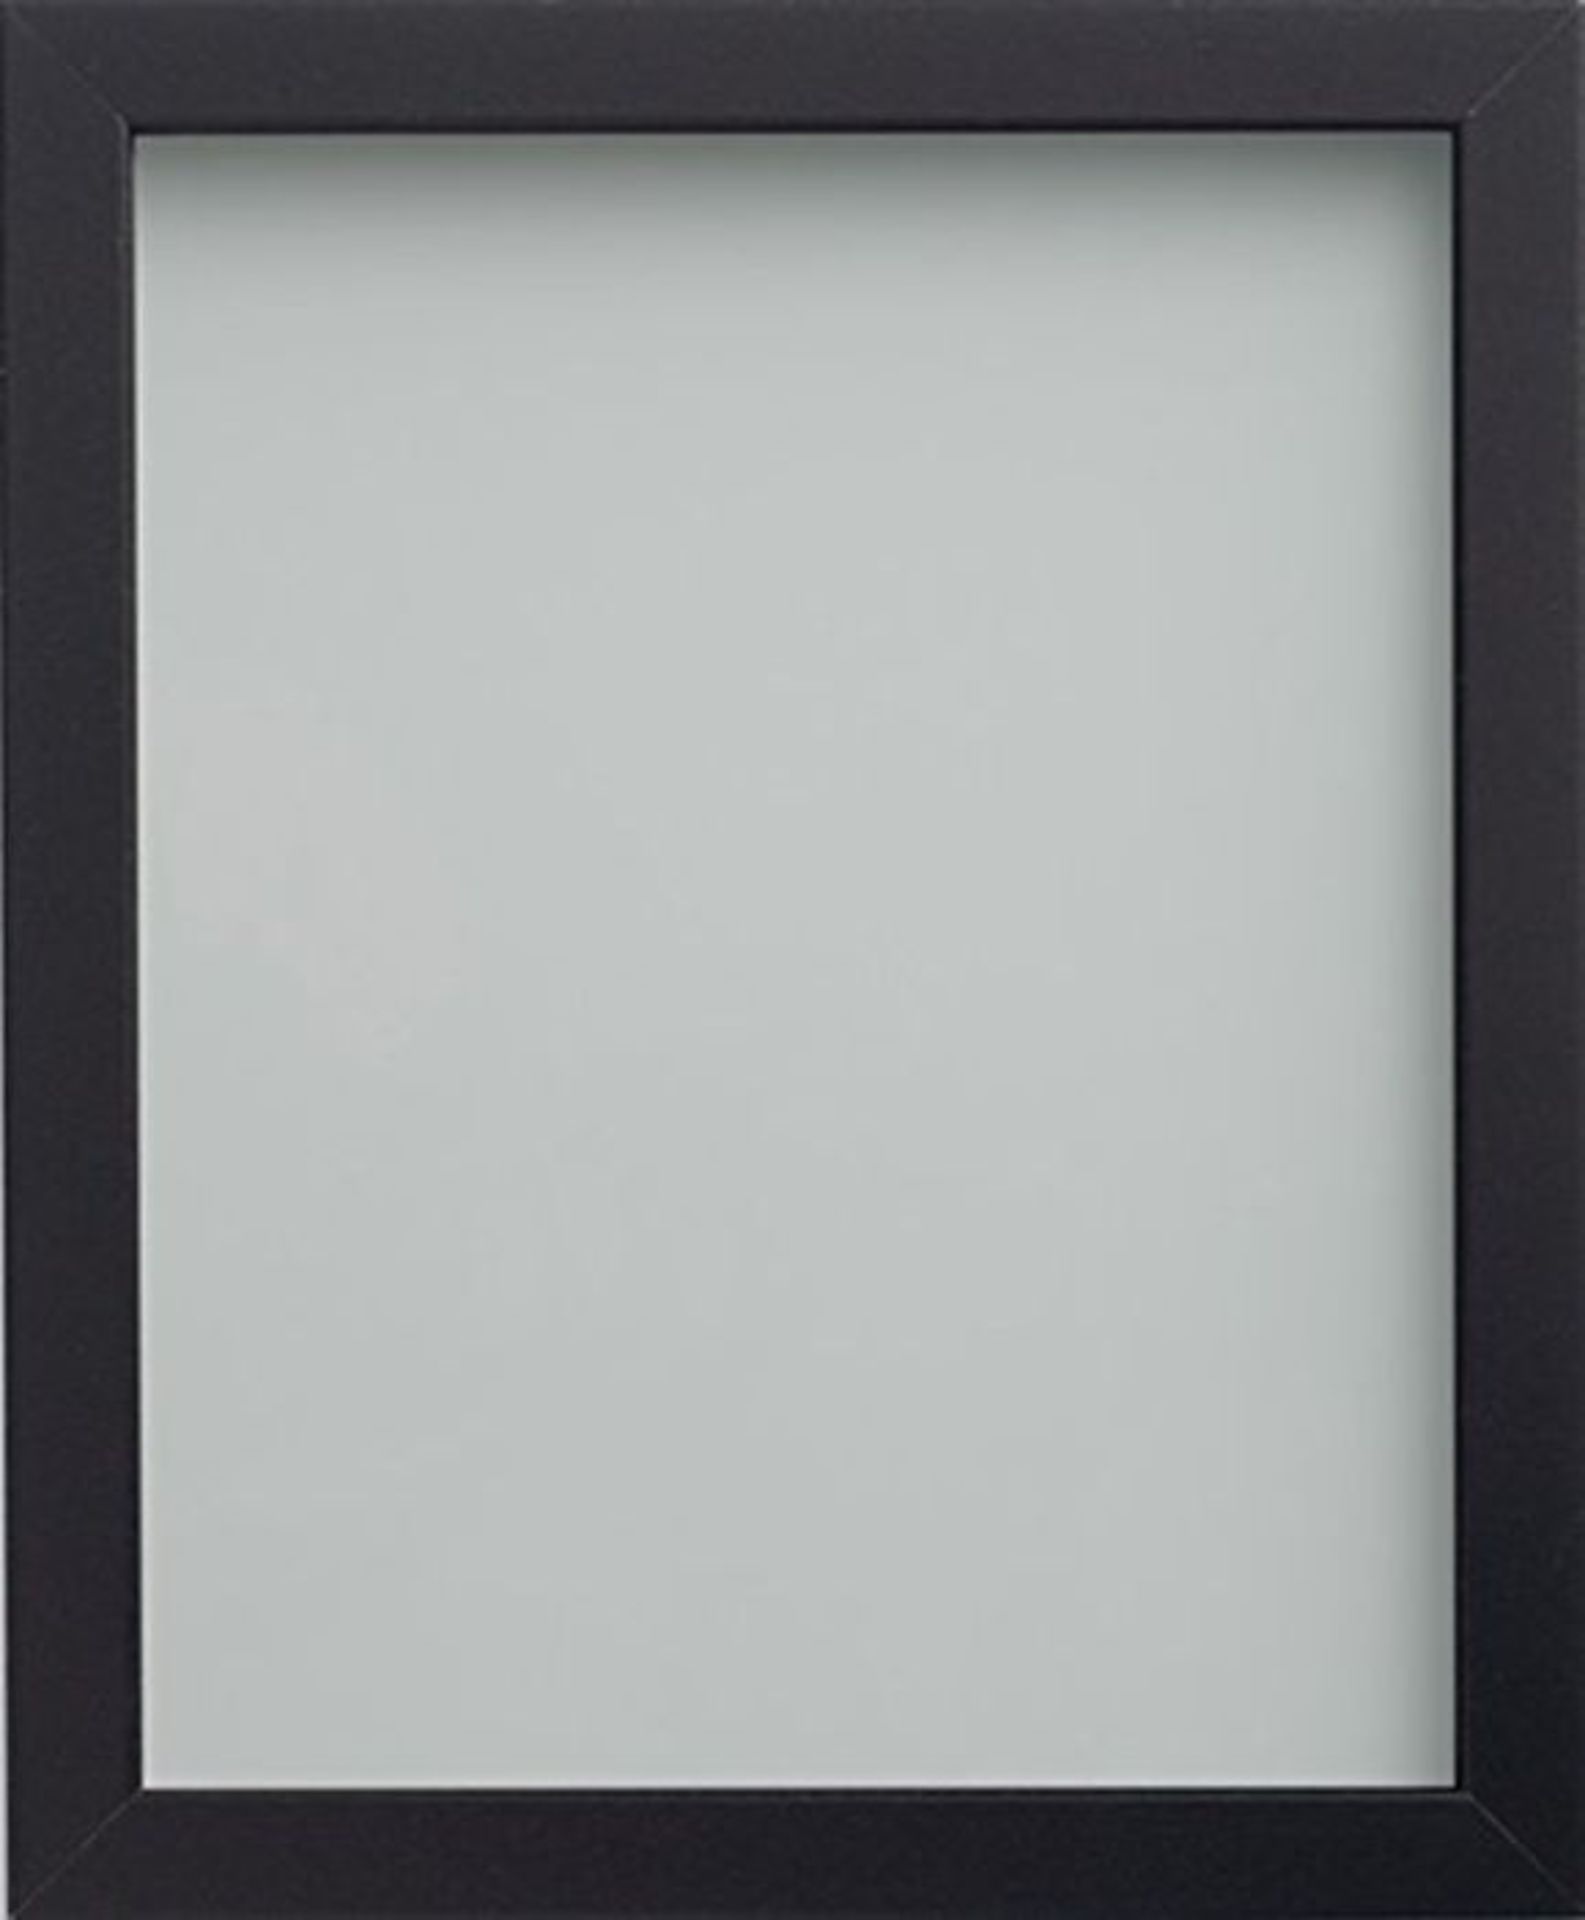 [CRACKED] Frame Company Allington Range 20 x 16-Inch Picture Photo Frame, Fitted with